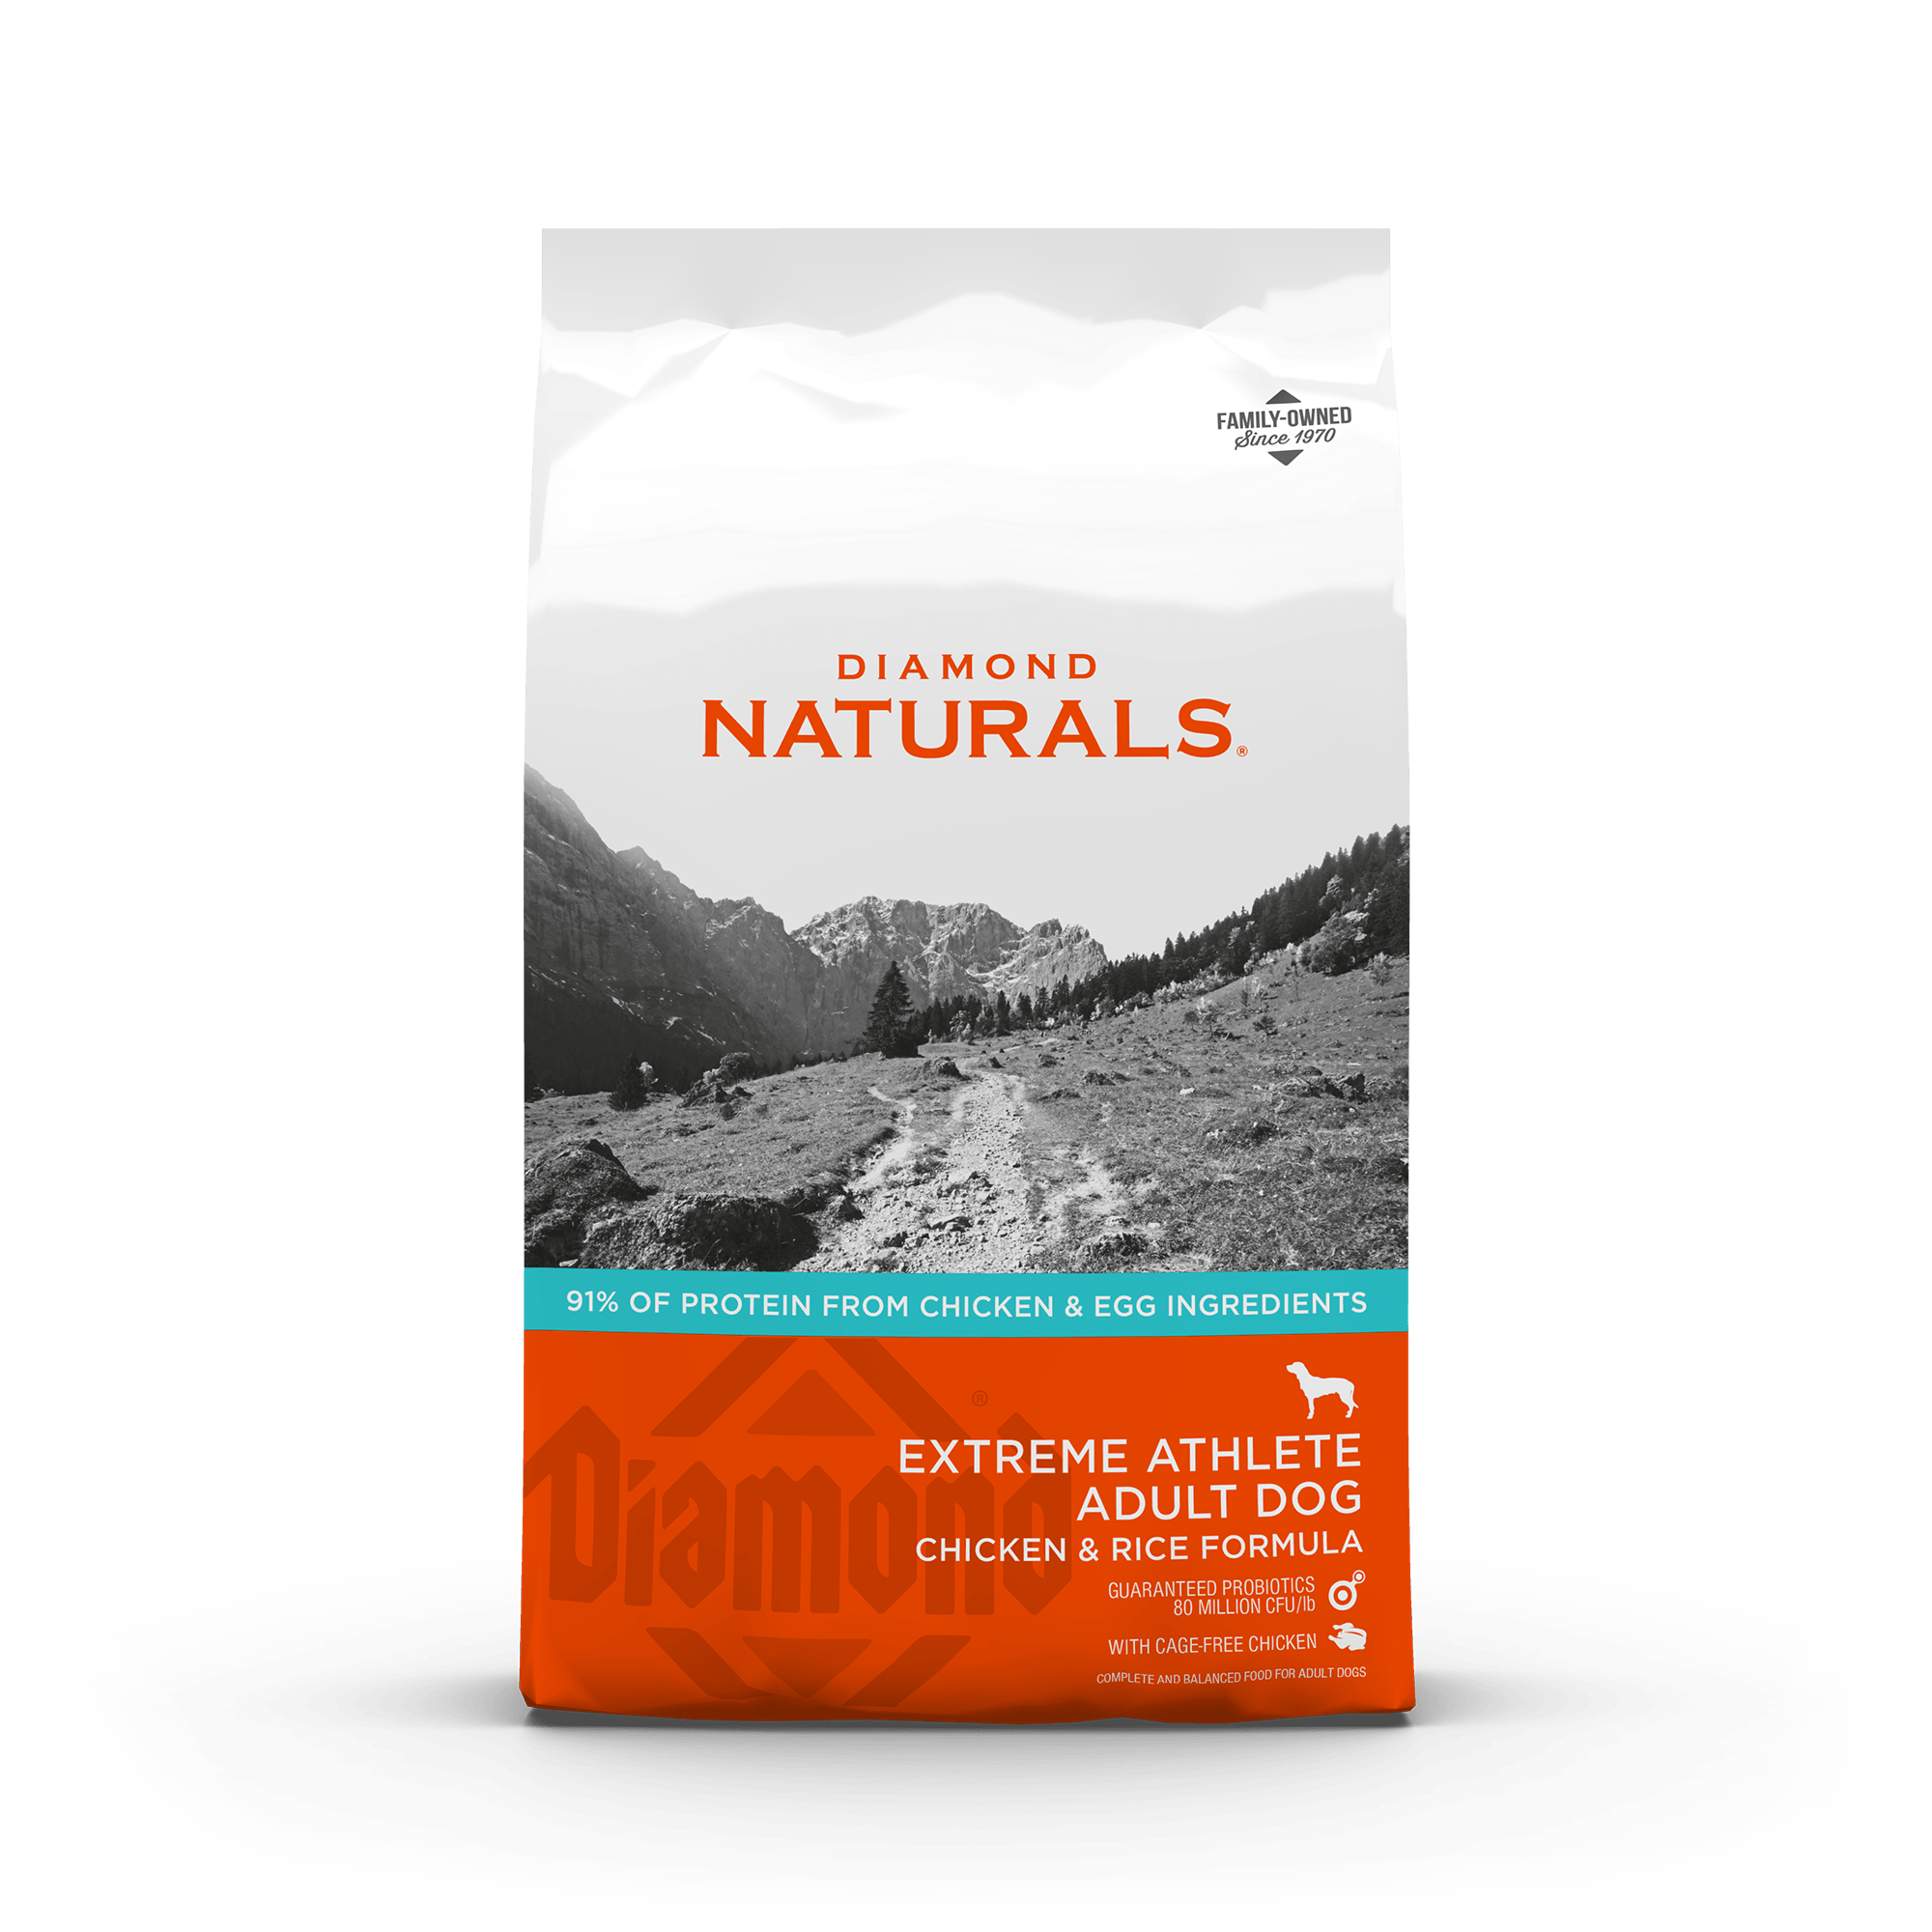 Diamond Naturals Extreme Athlete Adult Dog Chicken & Rice Formula product packaging